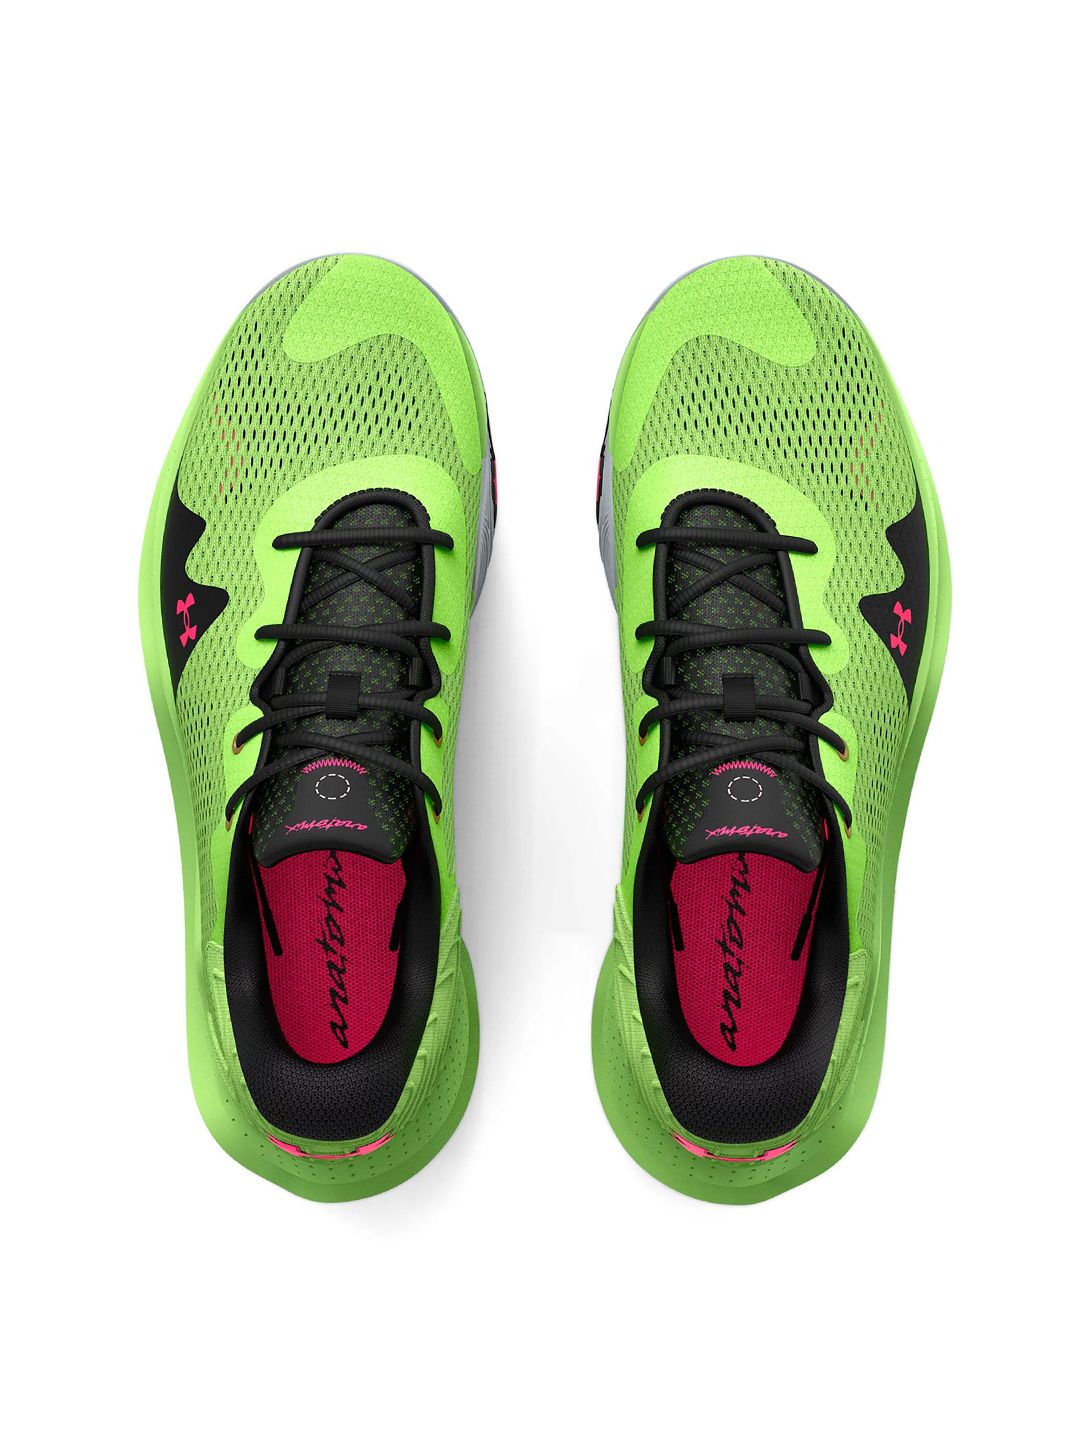 UNDER ARMOUR Unisex Green Spawn 4 Basketball Shoes Price in India